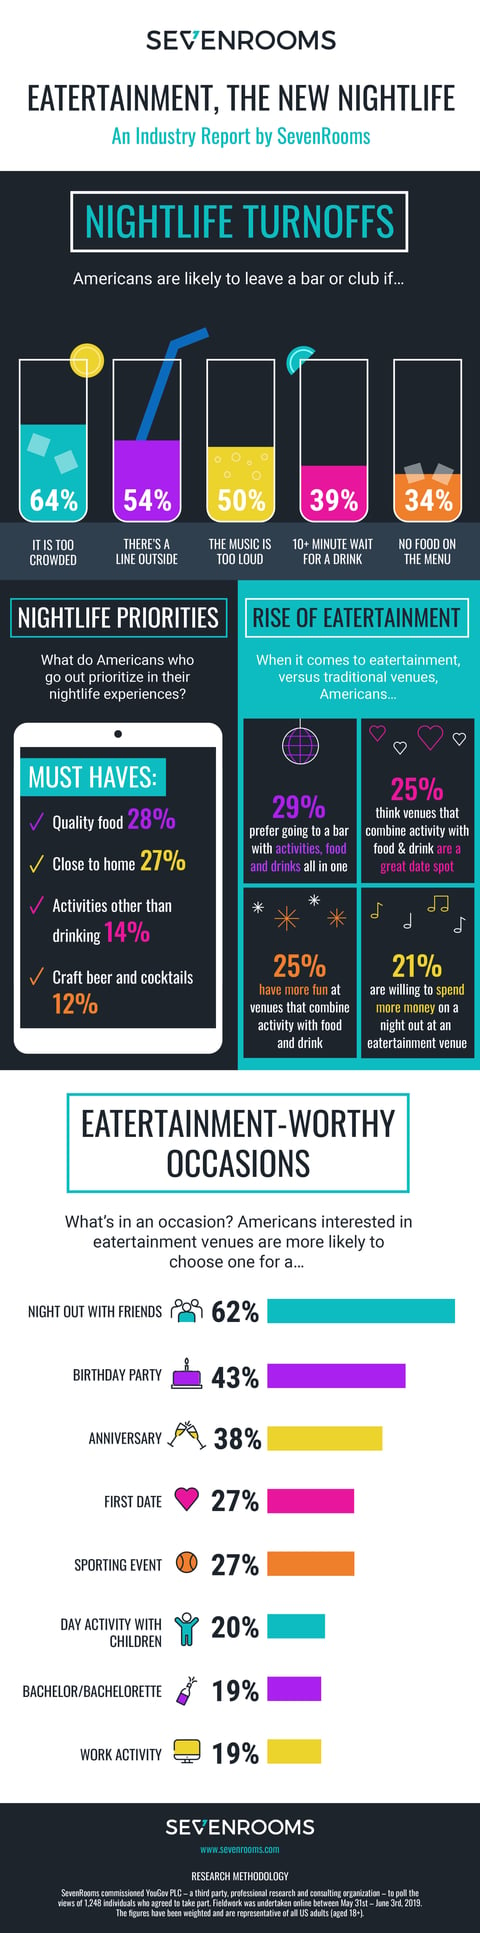 SevenRooms Eatertainment, the New Nightlife 2019 infographic